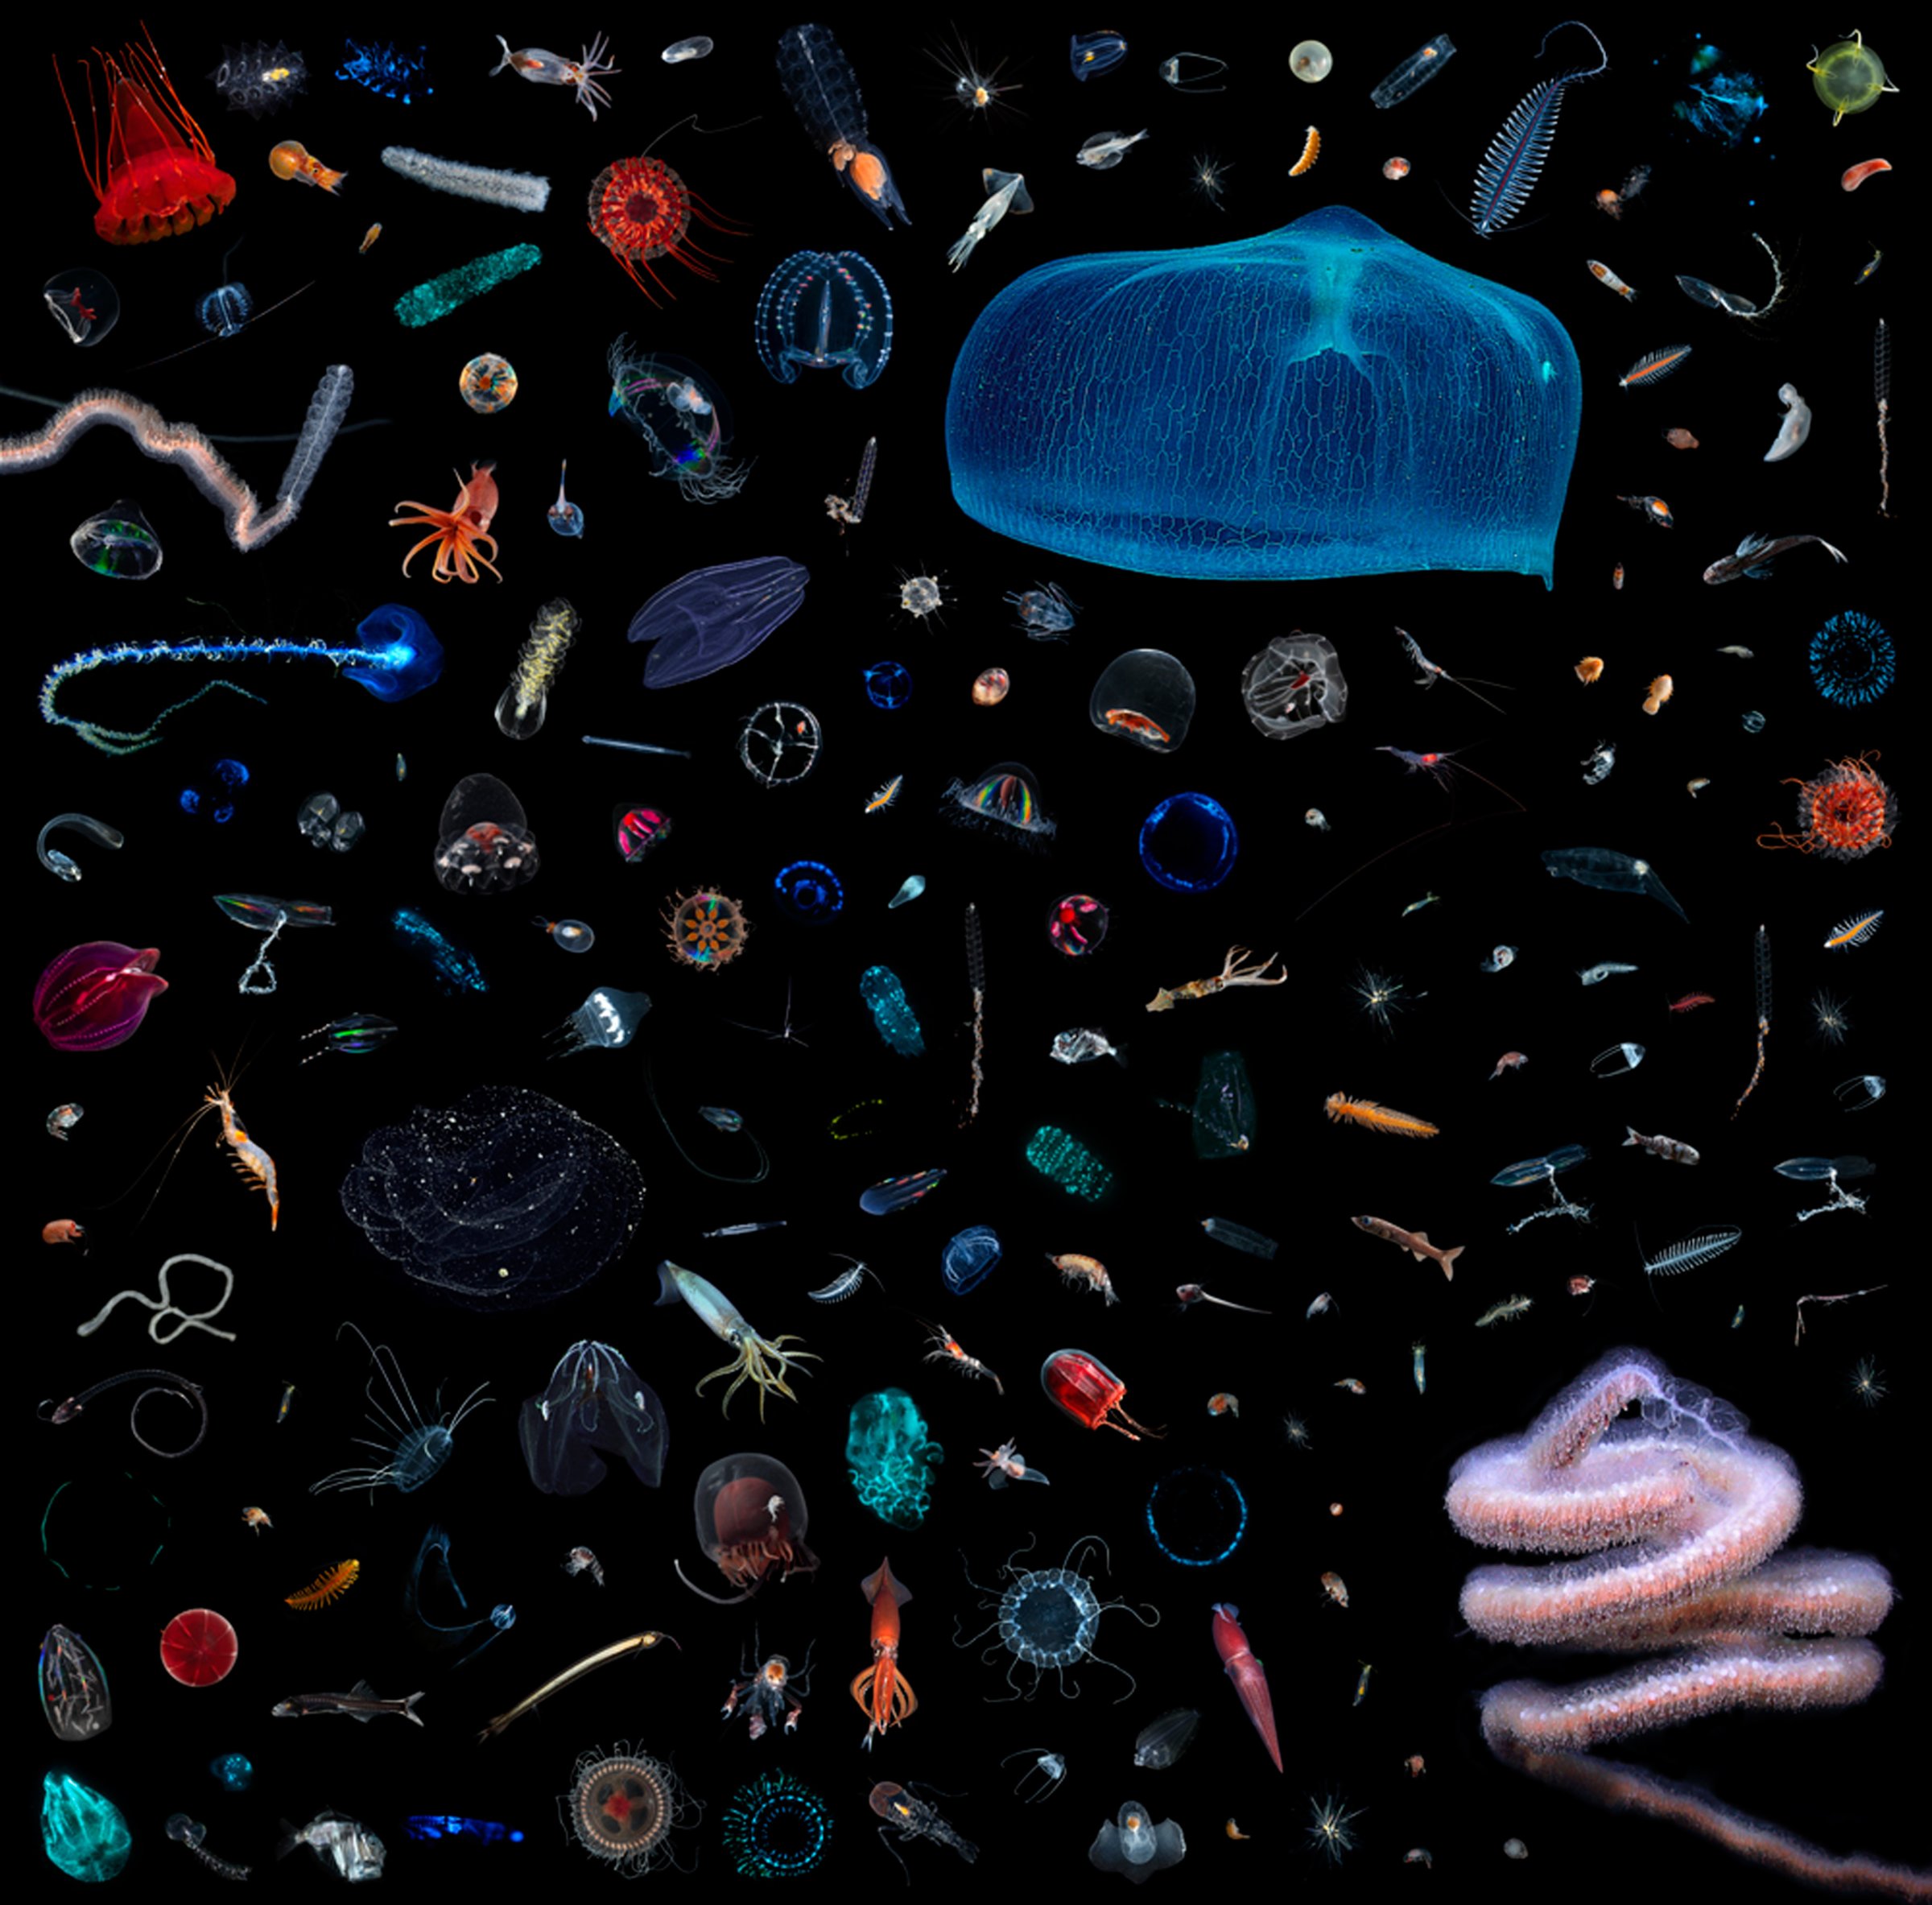 A selection of midwater creatures revealed through inventorying one cubic foot from Monterey Canyon, off the coast of California.